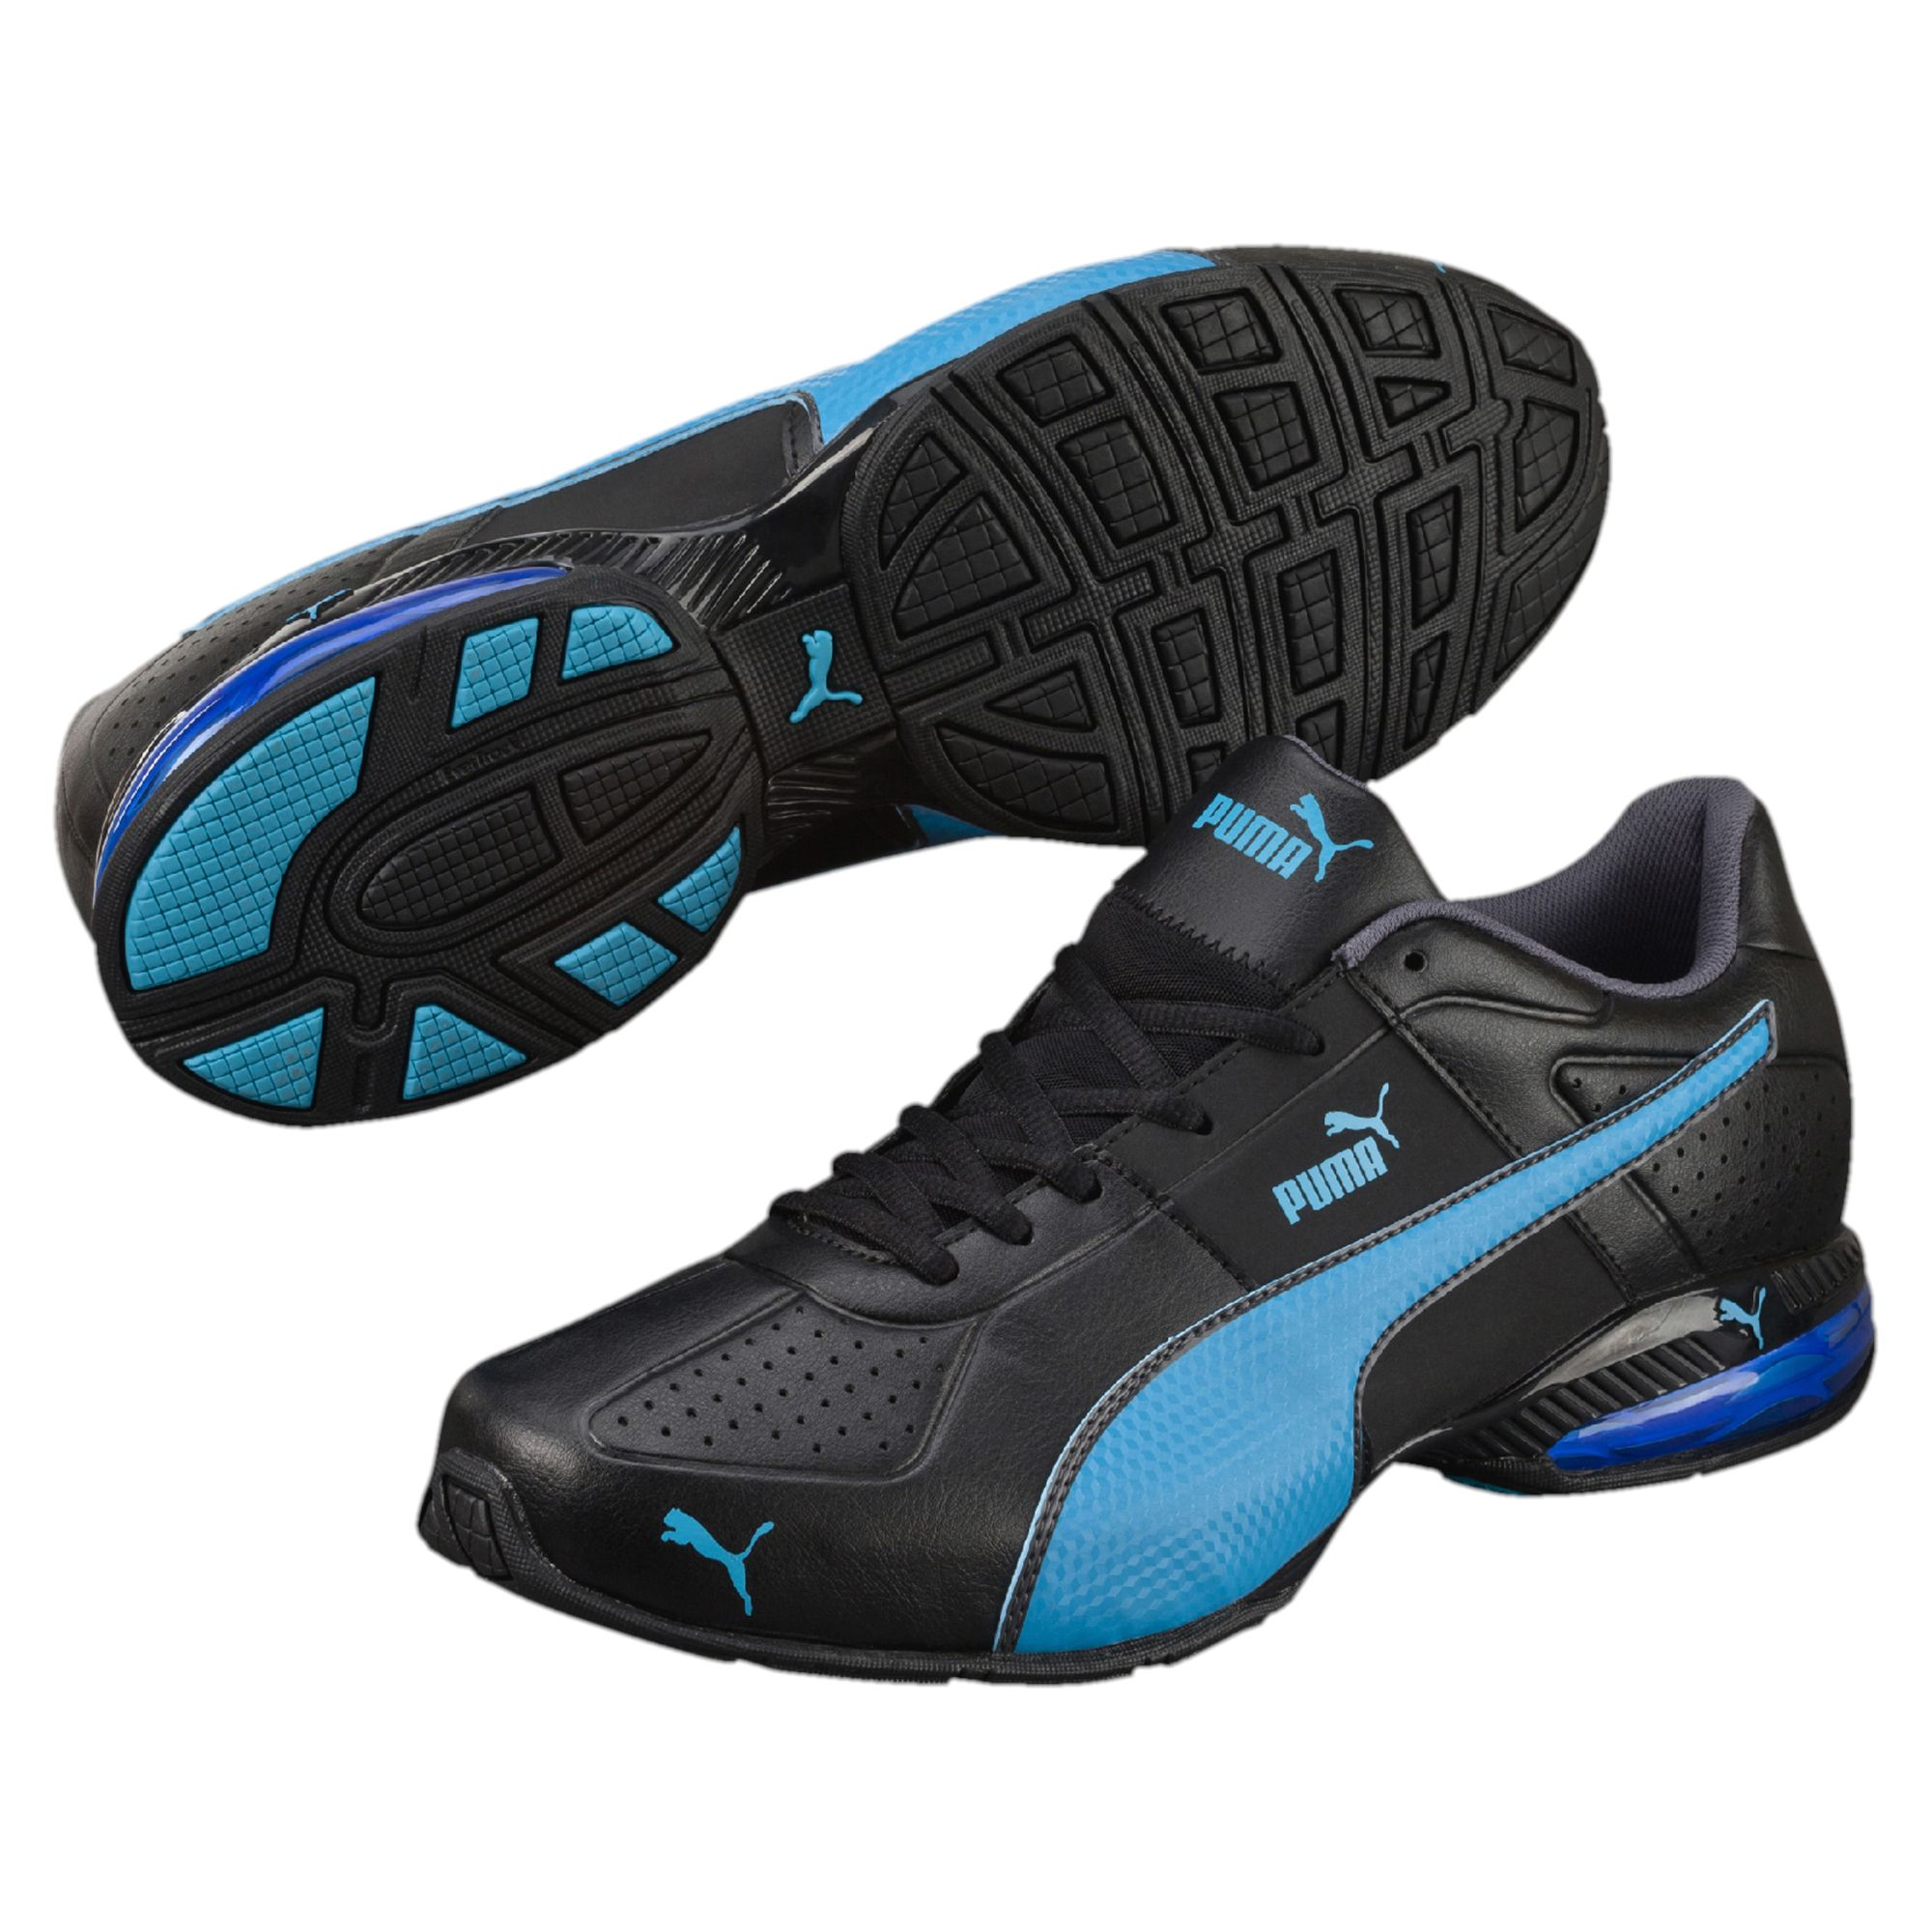 Lyst - Puma Cell Surin 2 Men's Training Shoes in Blue for Men